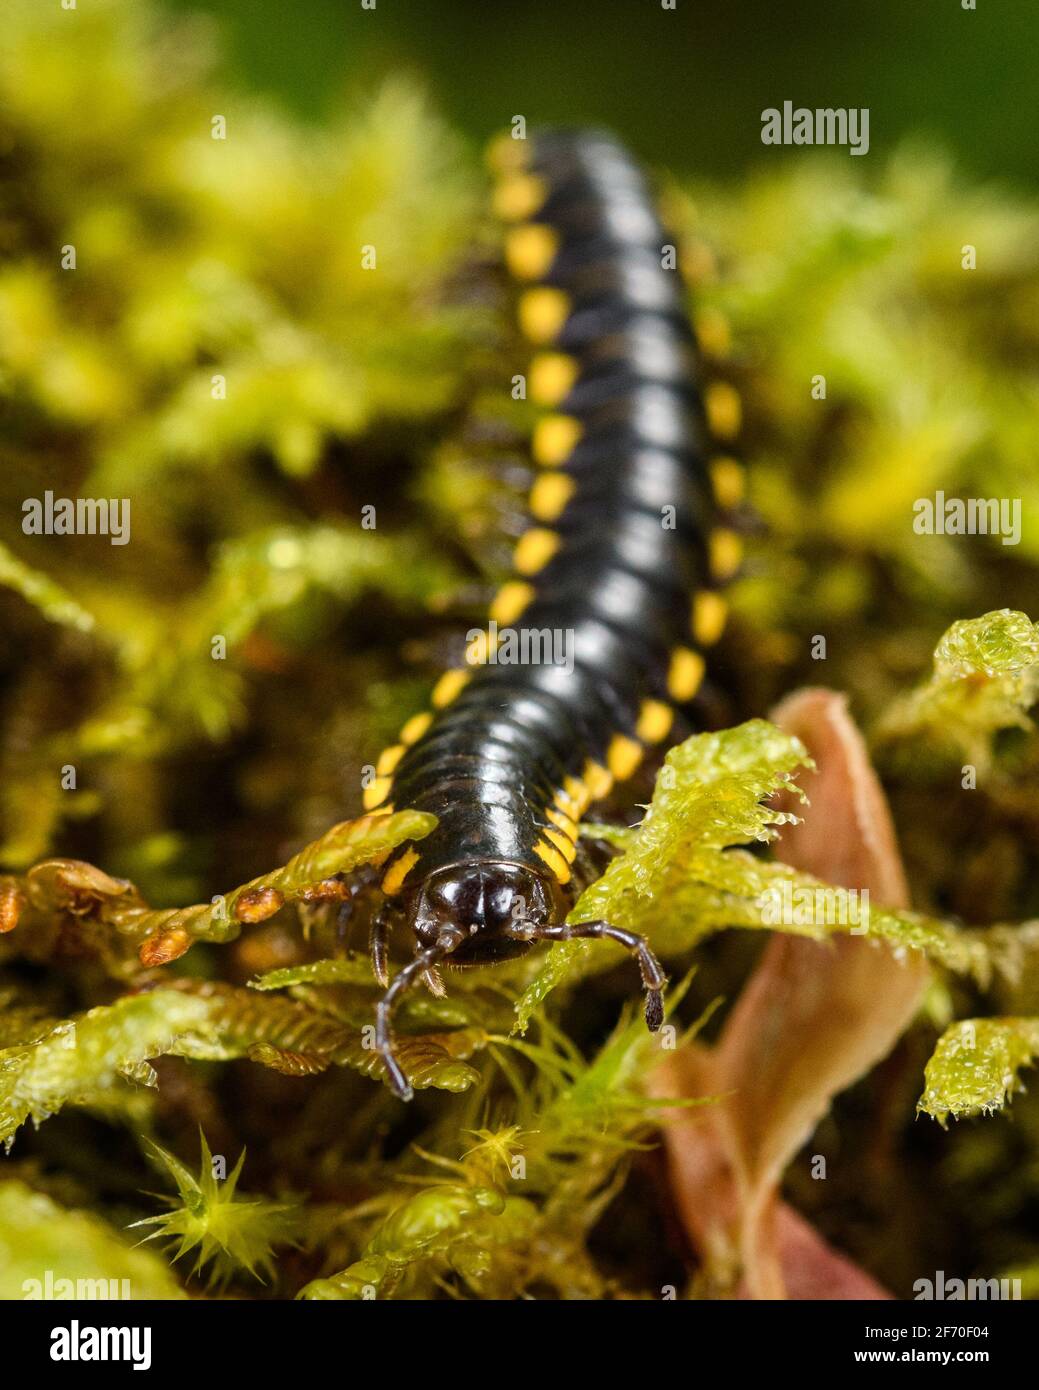 The Yellow Spotted Millipede which protects itself with the use of cyanide crawls across a bed of green moss towards the camera's macro lens Stock Photo